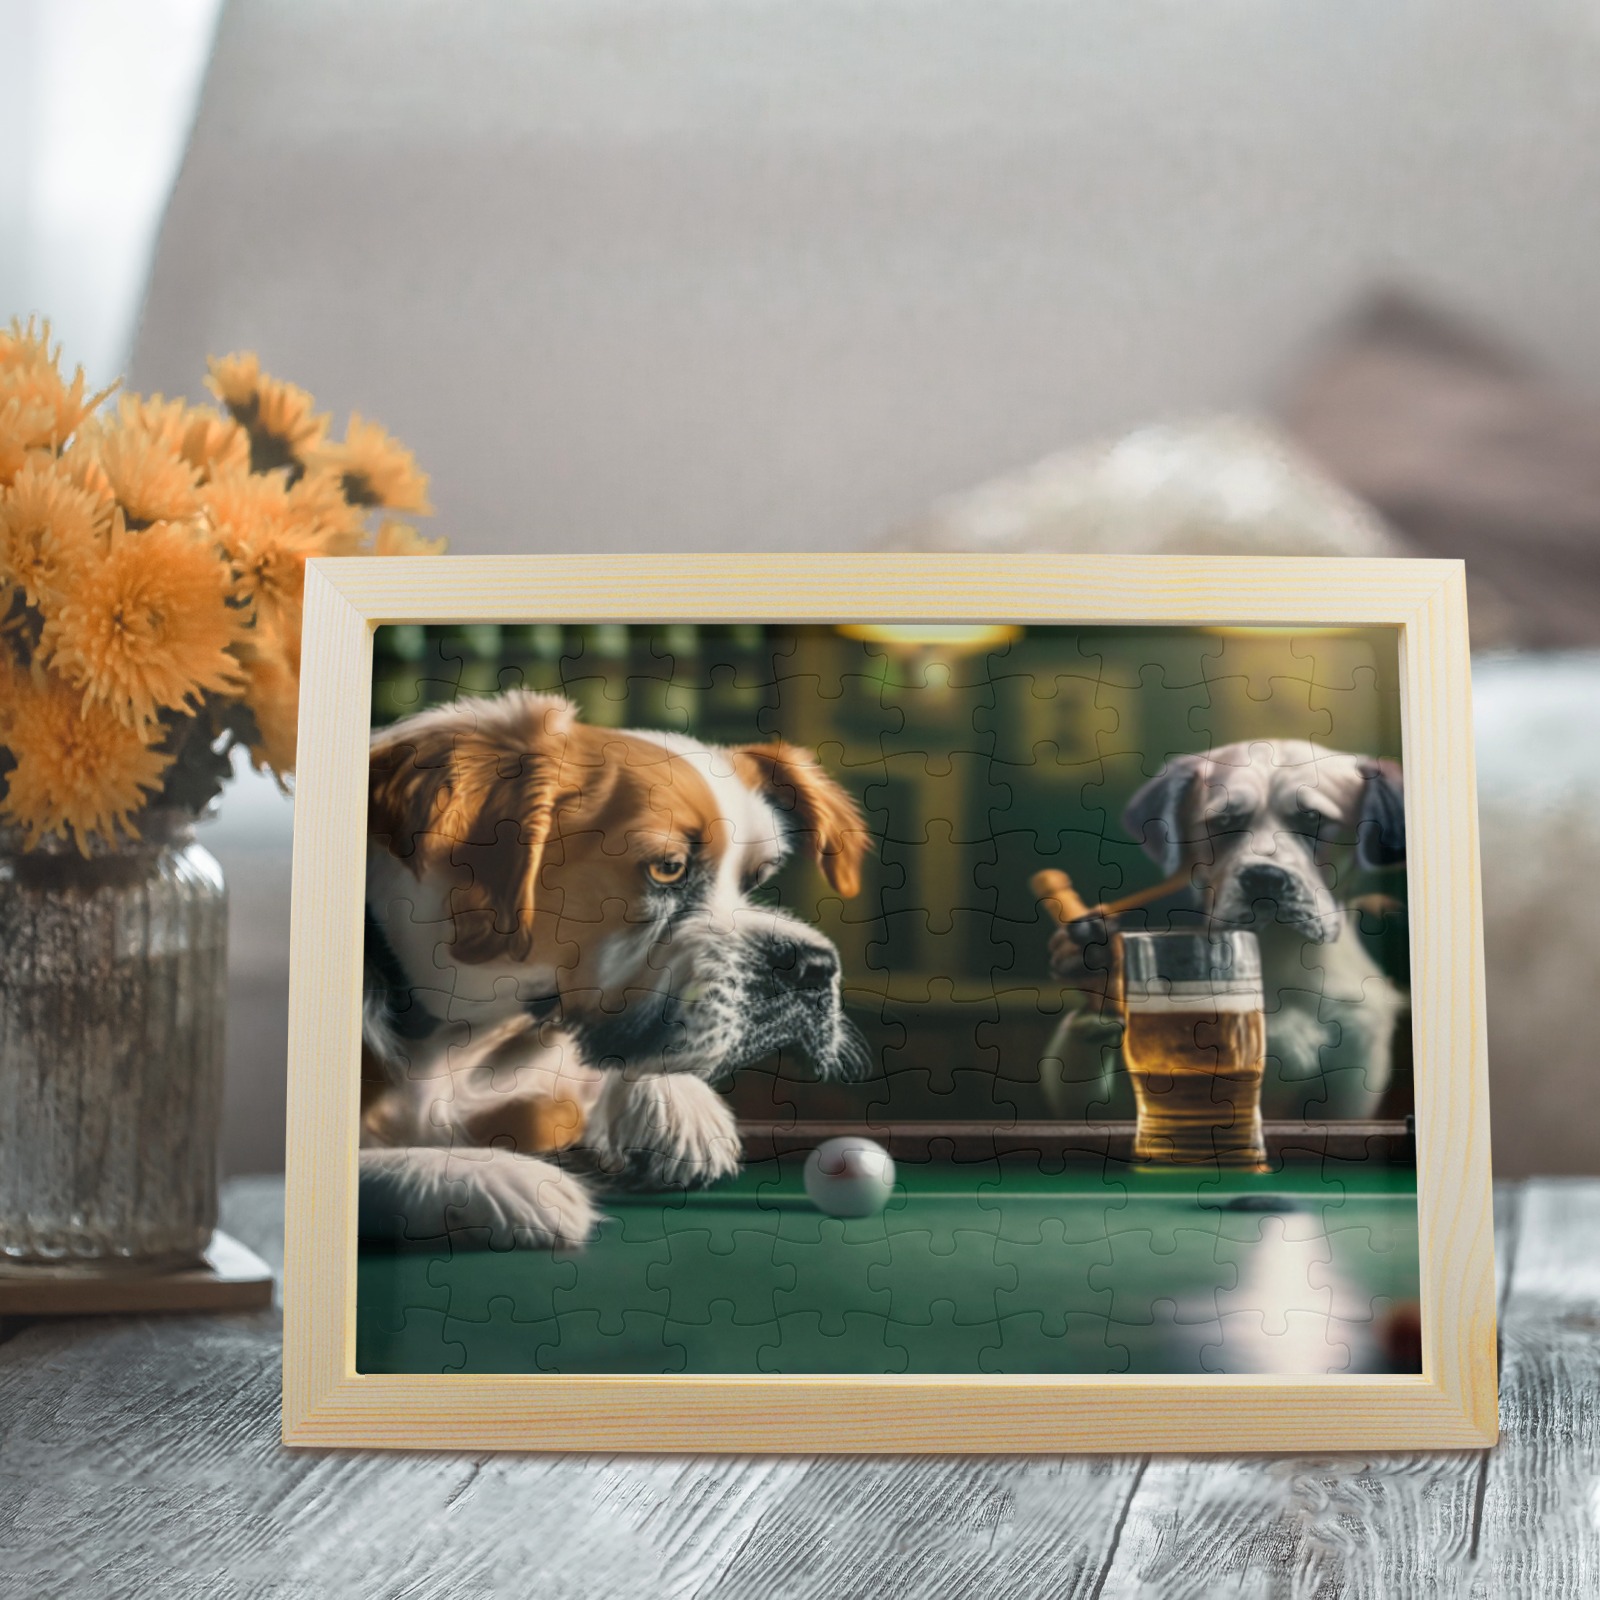 Be careful of my drink 100-Piece Puzzle Frame 12.5"x 9.5"